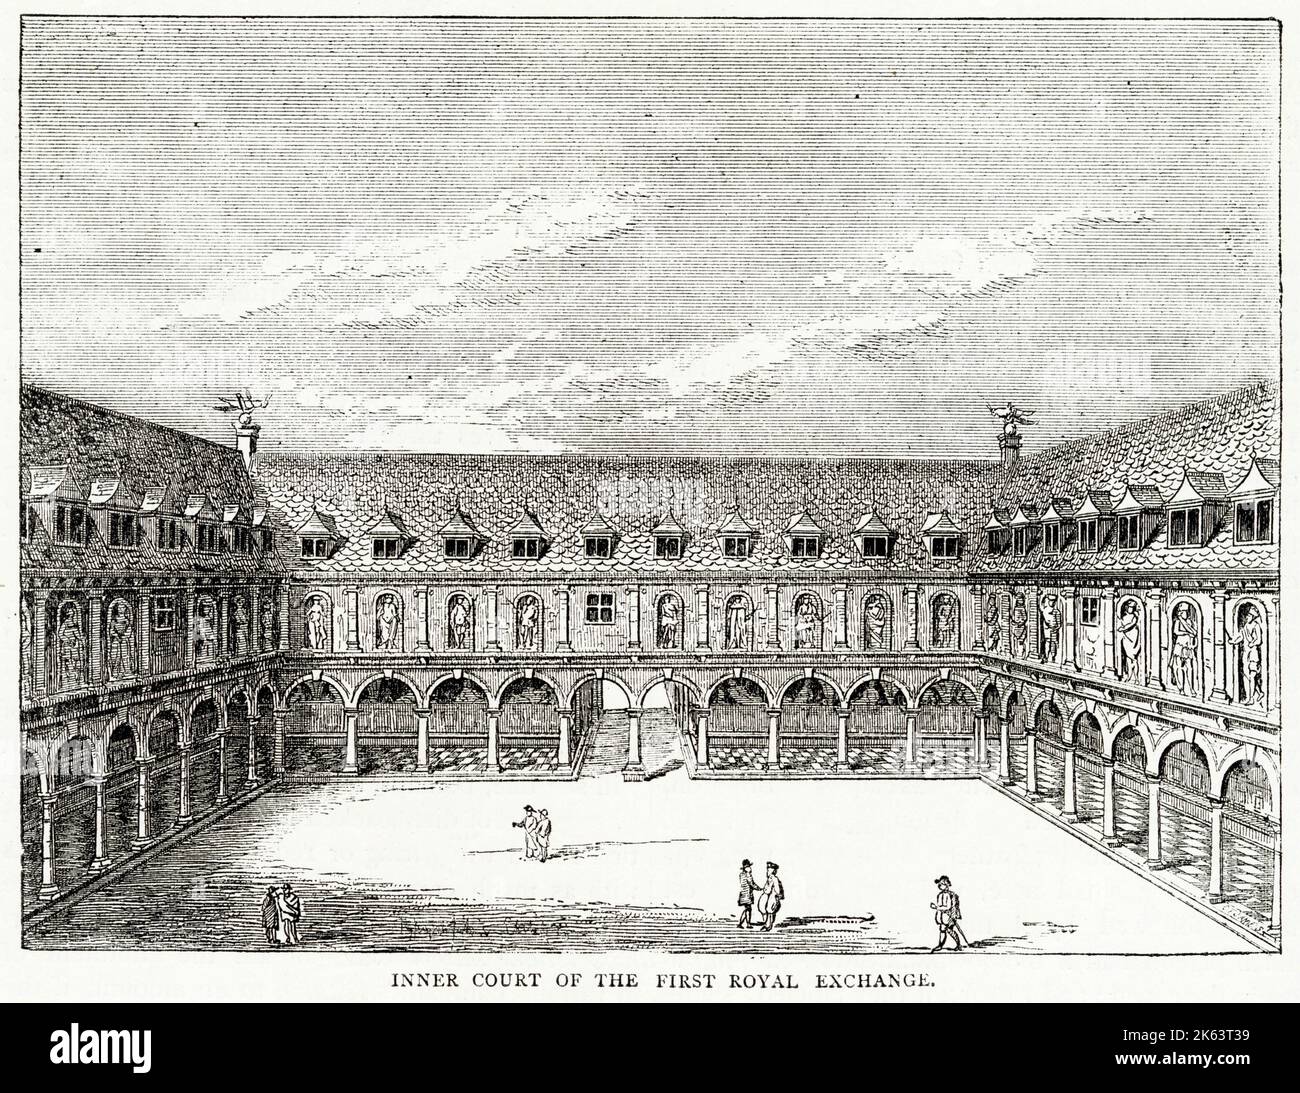 The courtyard of Thomas Gresham's Royal Exchange, modelled on the bourse at Antwerp : sadly, it will be destroyed in the Great Fire of 1666. Stock Photo